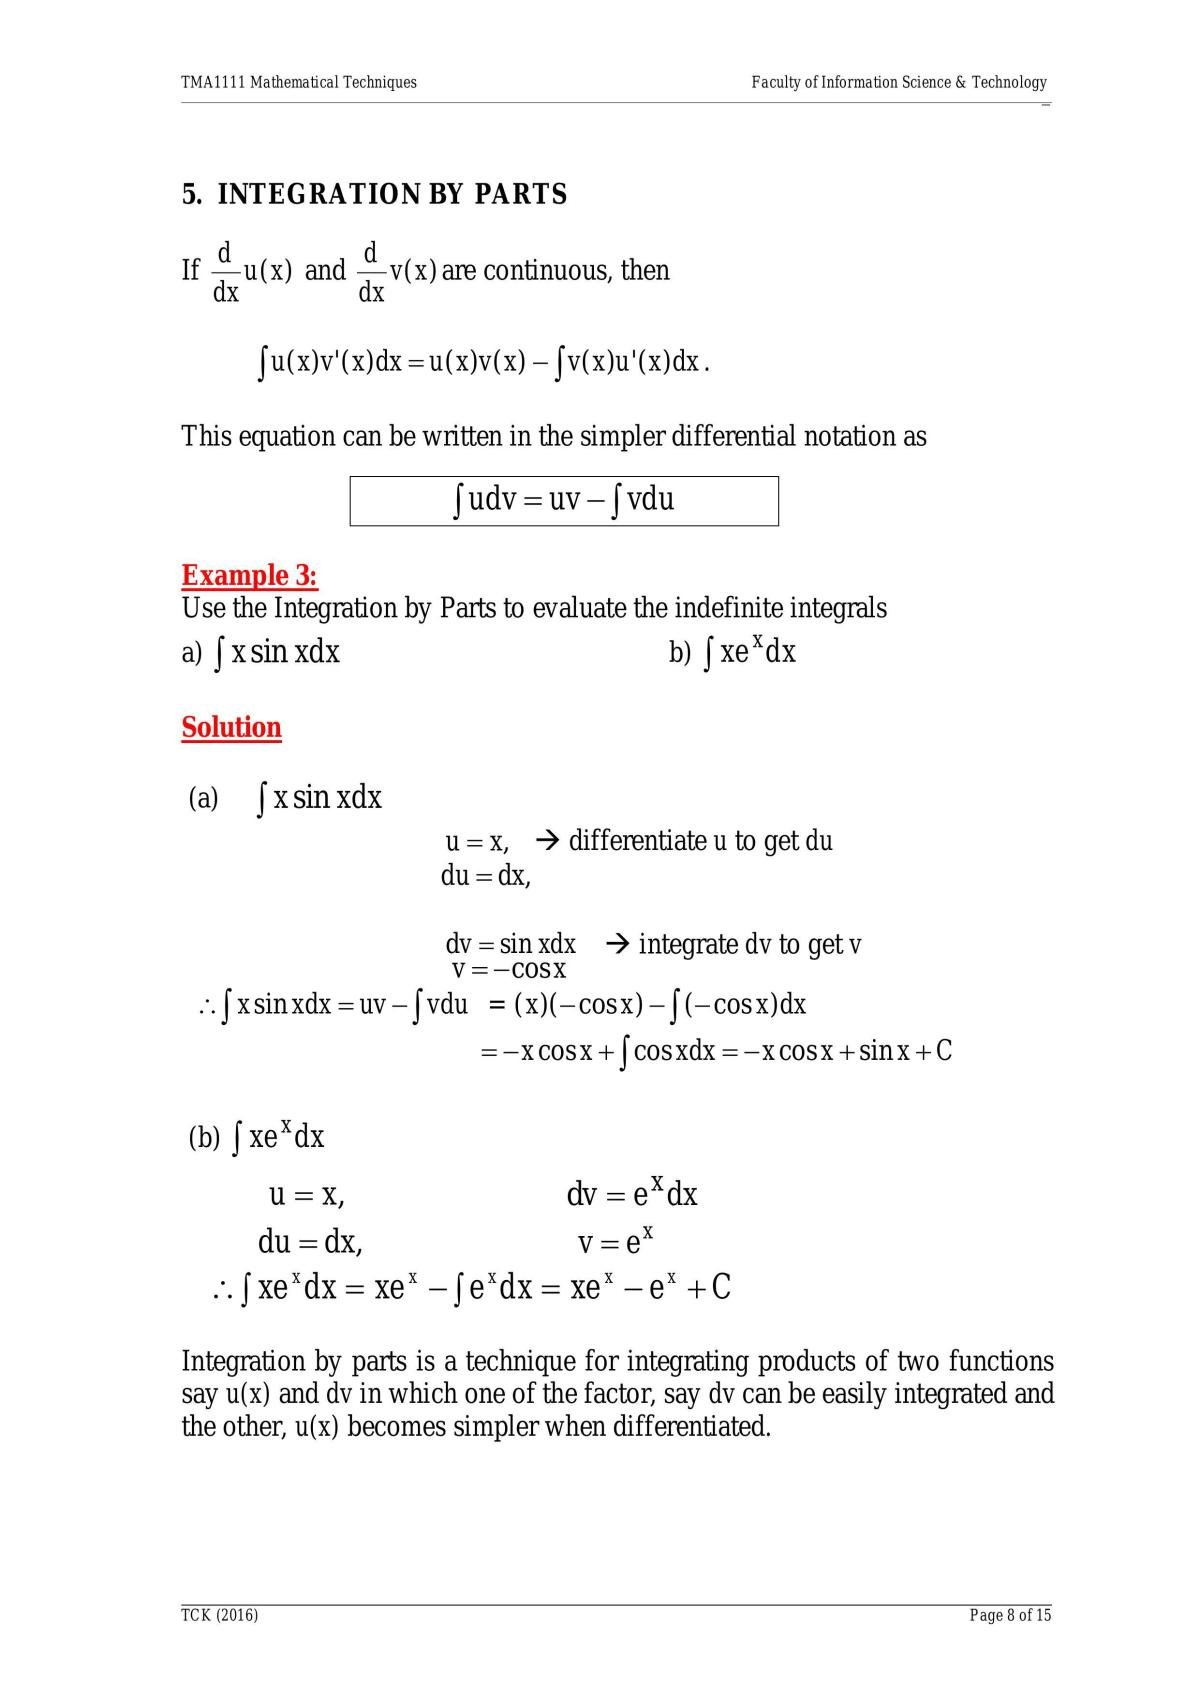 TMA1111 Mathematical Techniques Notes - Page 89